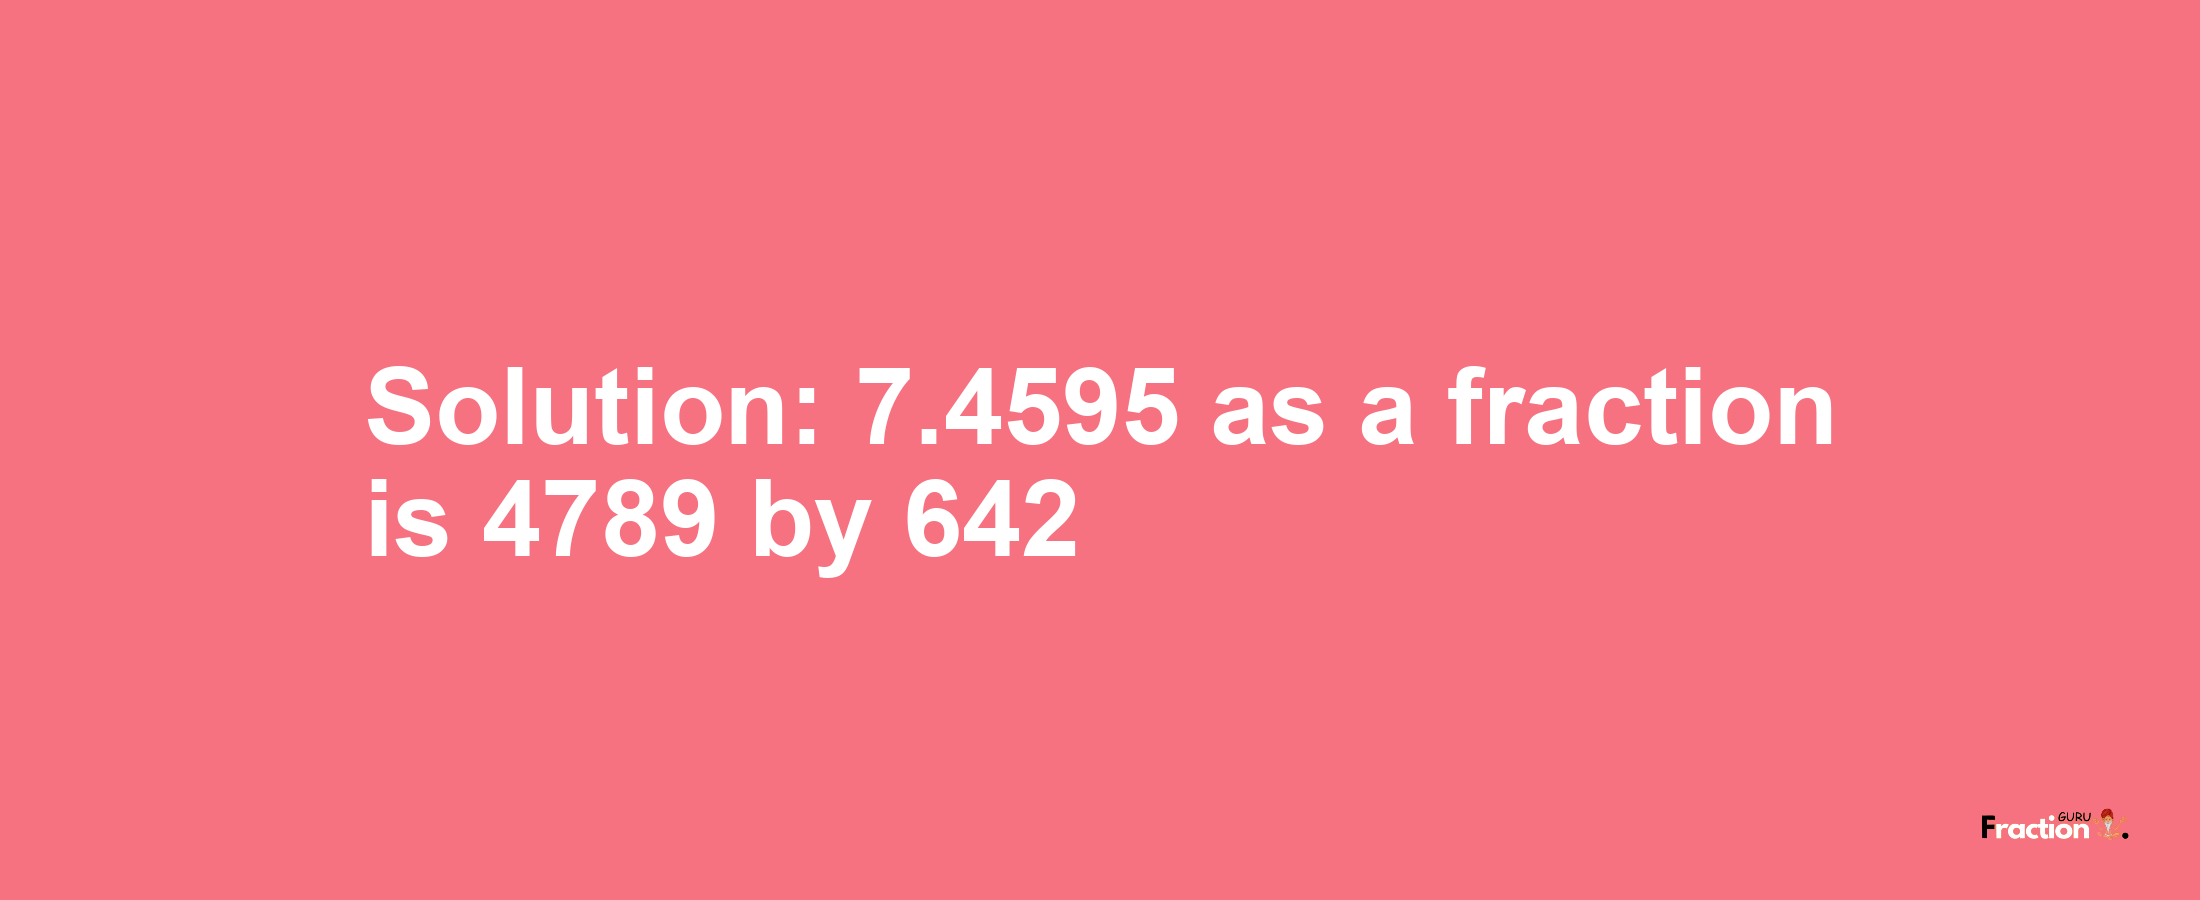 Solution:7.4595 as a fraction is 4789/642